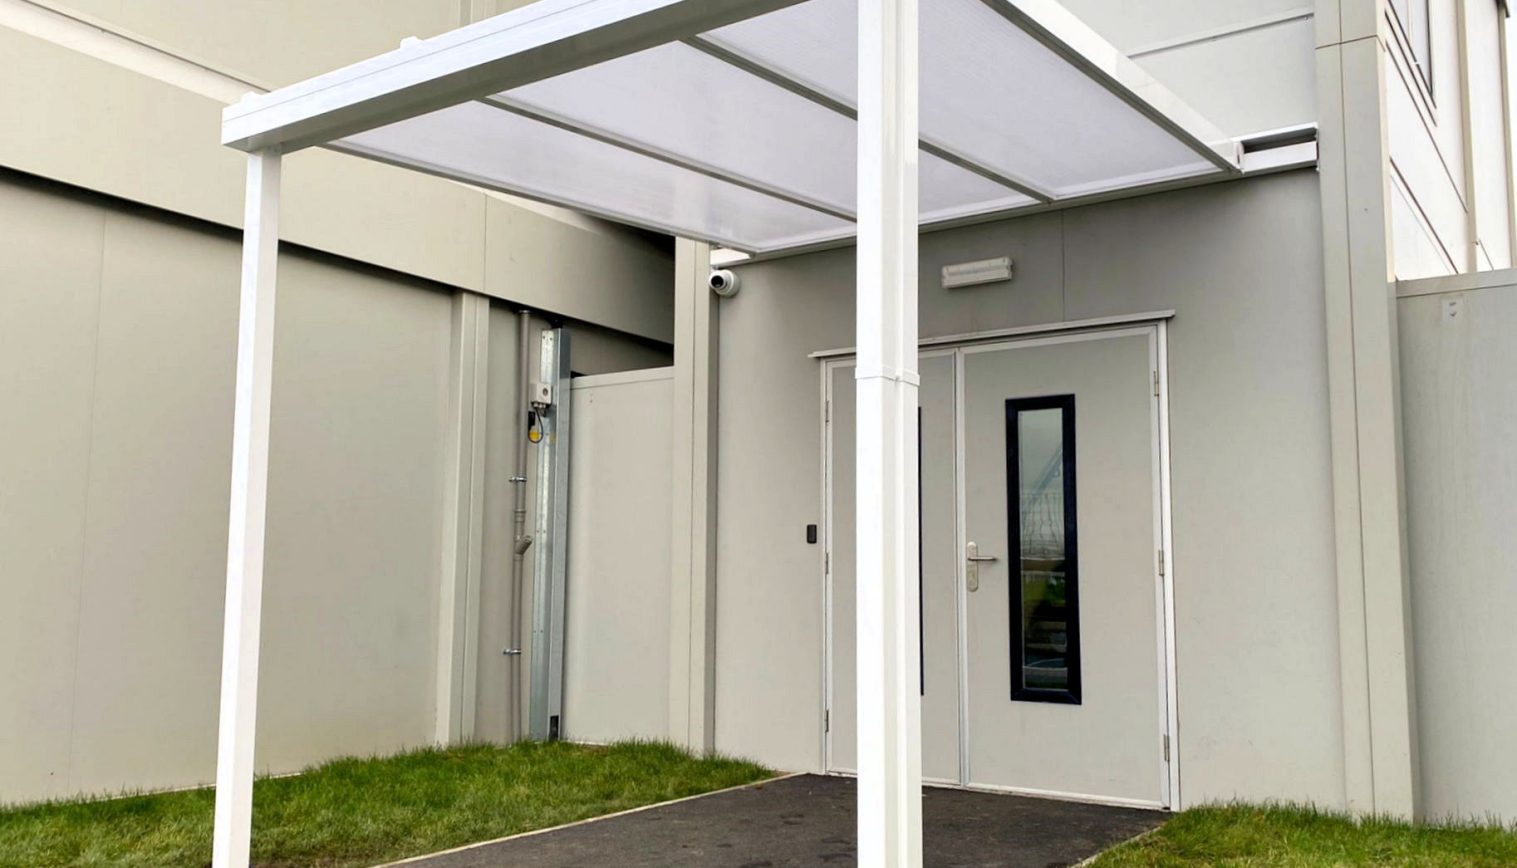 Laurence Calvert – Coniston Wall Mounted Canopy